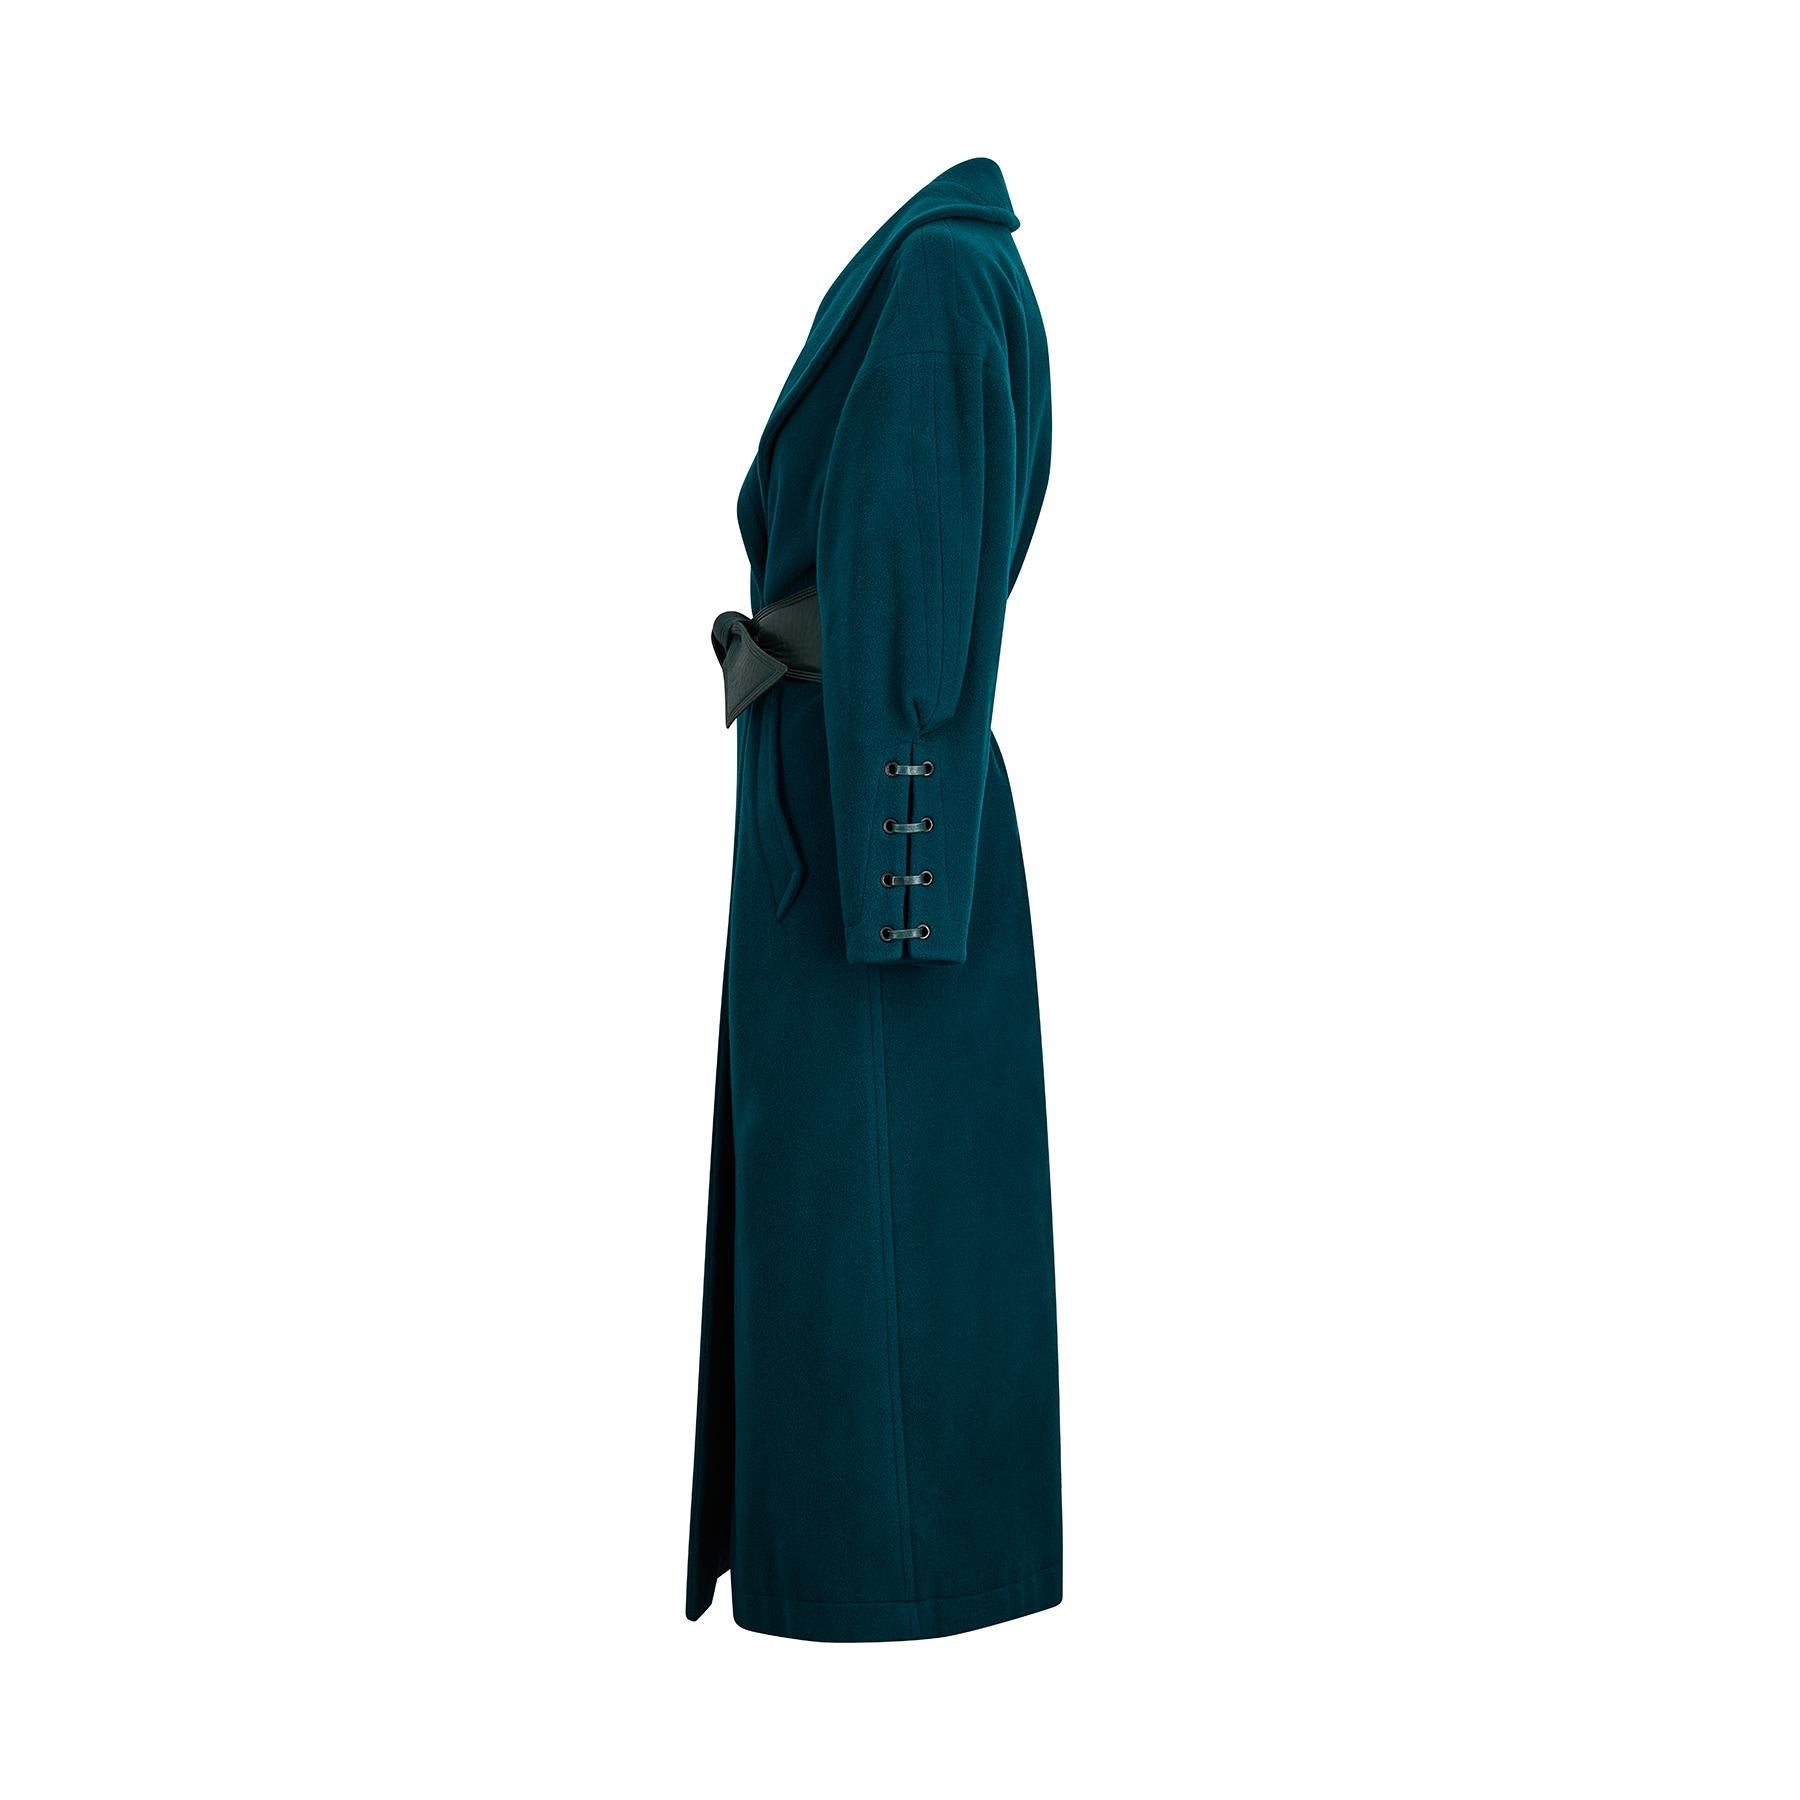 1980s or early 1990s Claude Montana wool coat in a lovely shade of dark teal, almost forest green. It has a wide crossover collar and fastens with a soft leather effect belt in a matching green shade. The sleeves are relaxed through the shoulder and